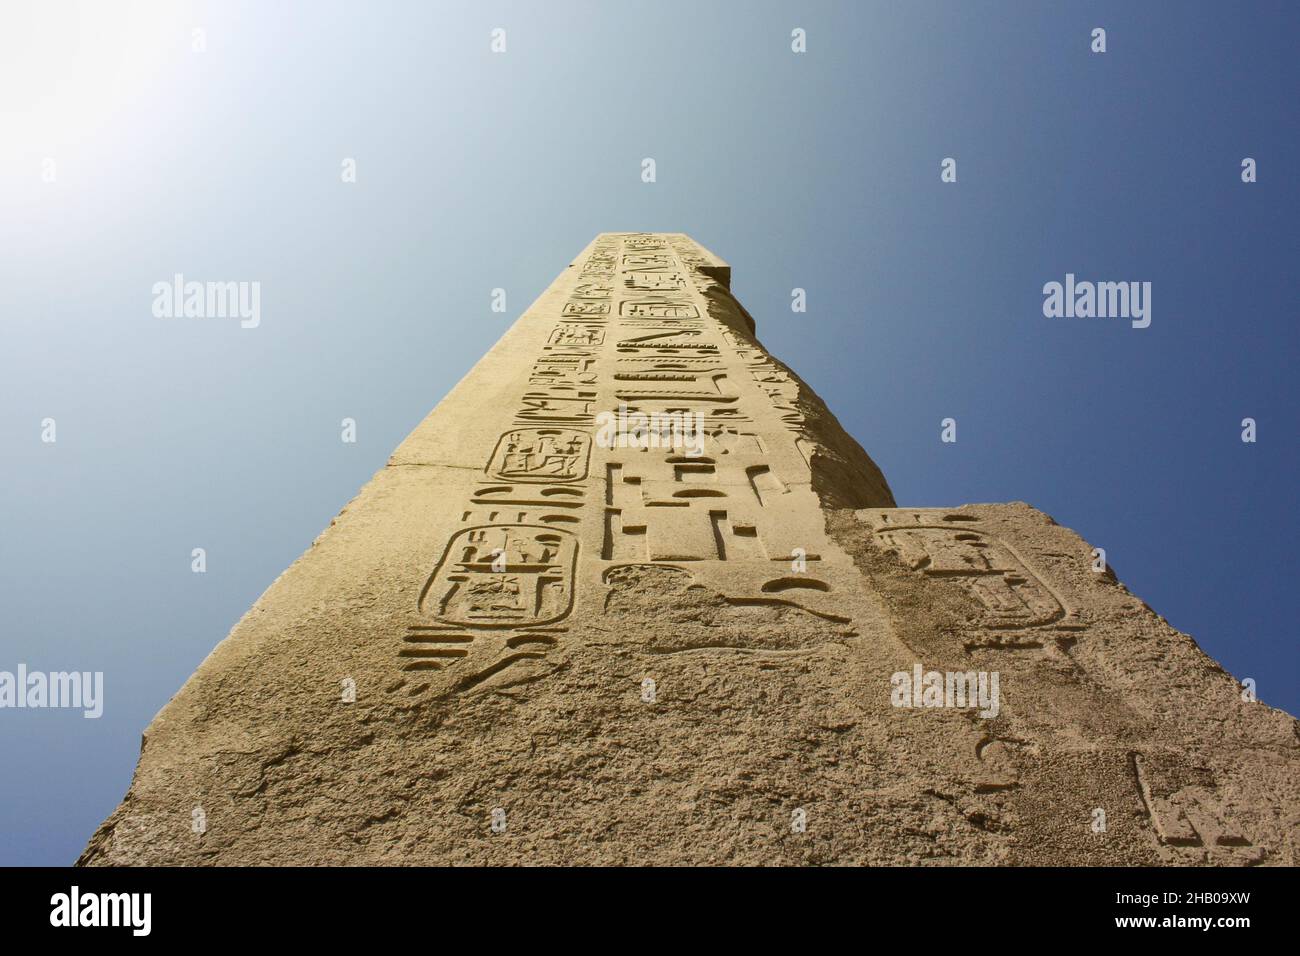 Karnak temple complex in Luxor, Egypt. Ancient stella with hieroglyphs on the blue sky. Stock Photo